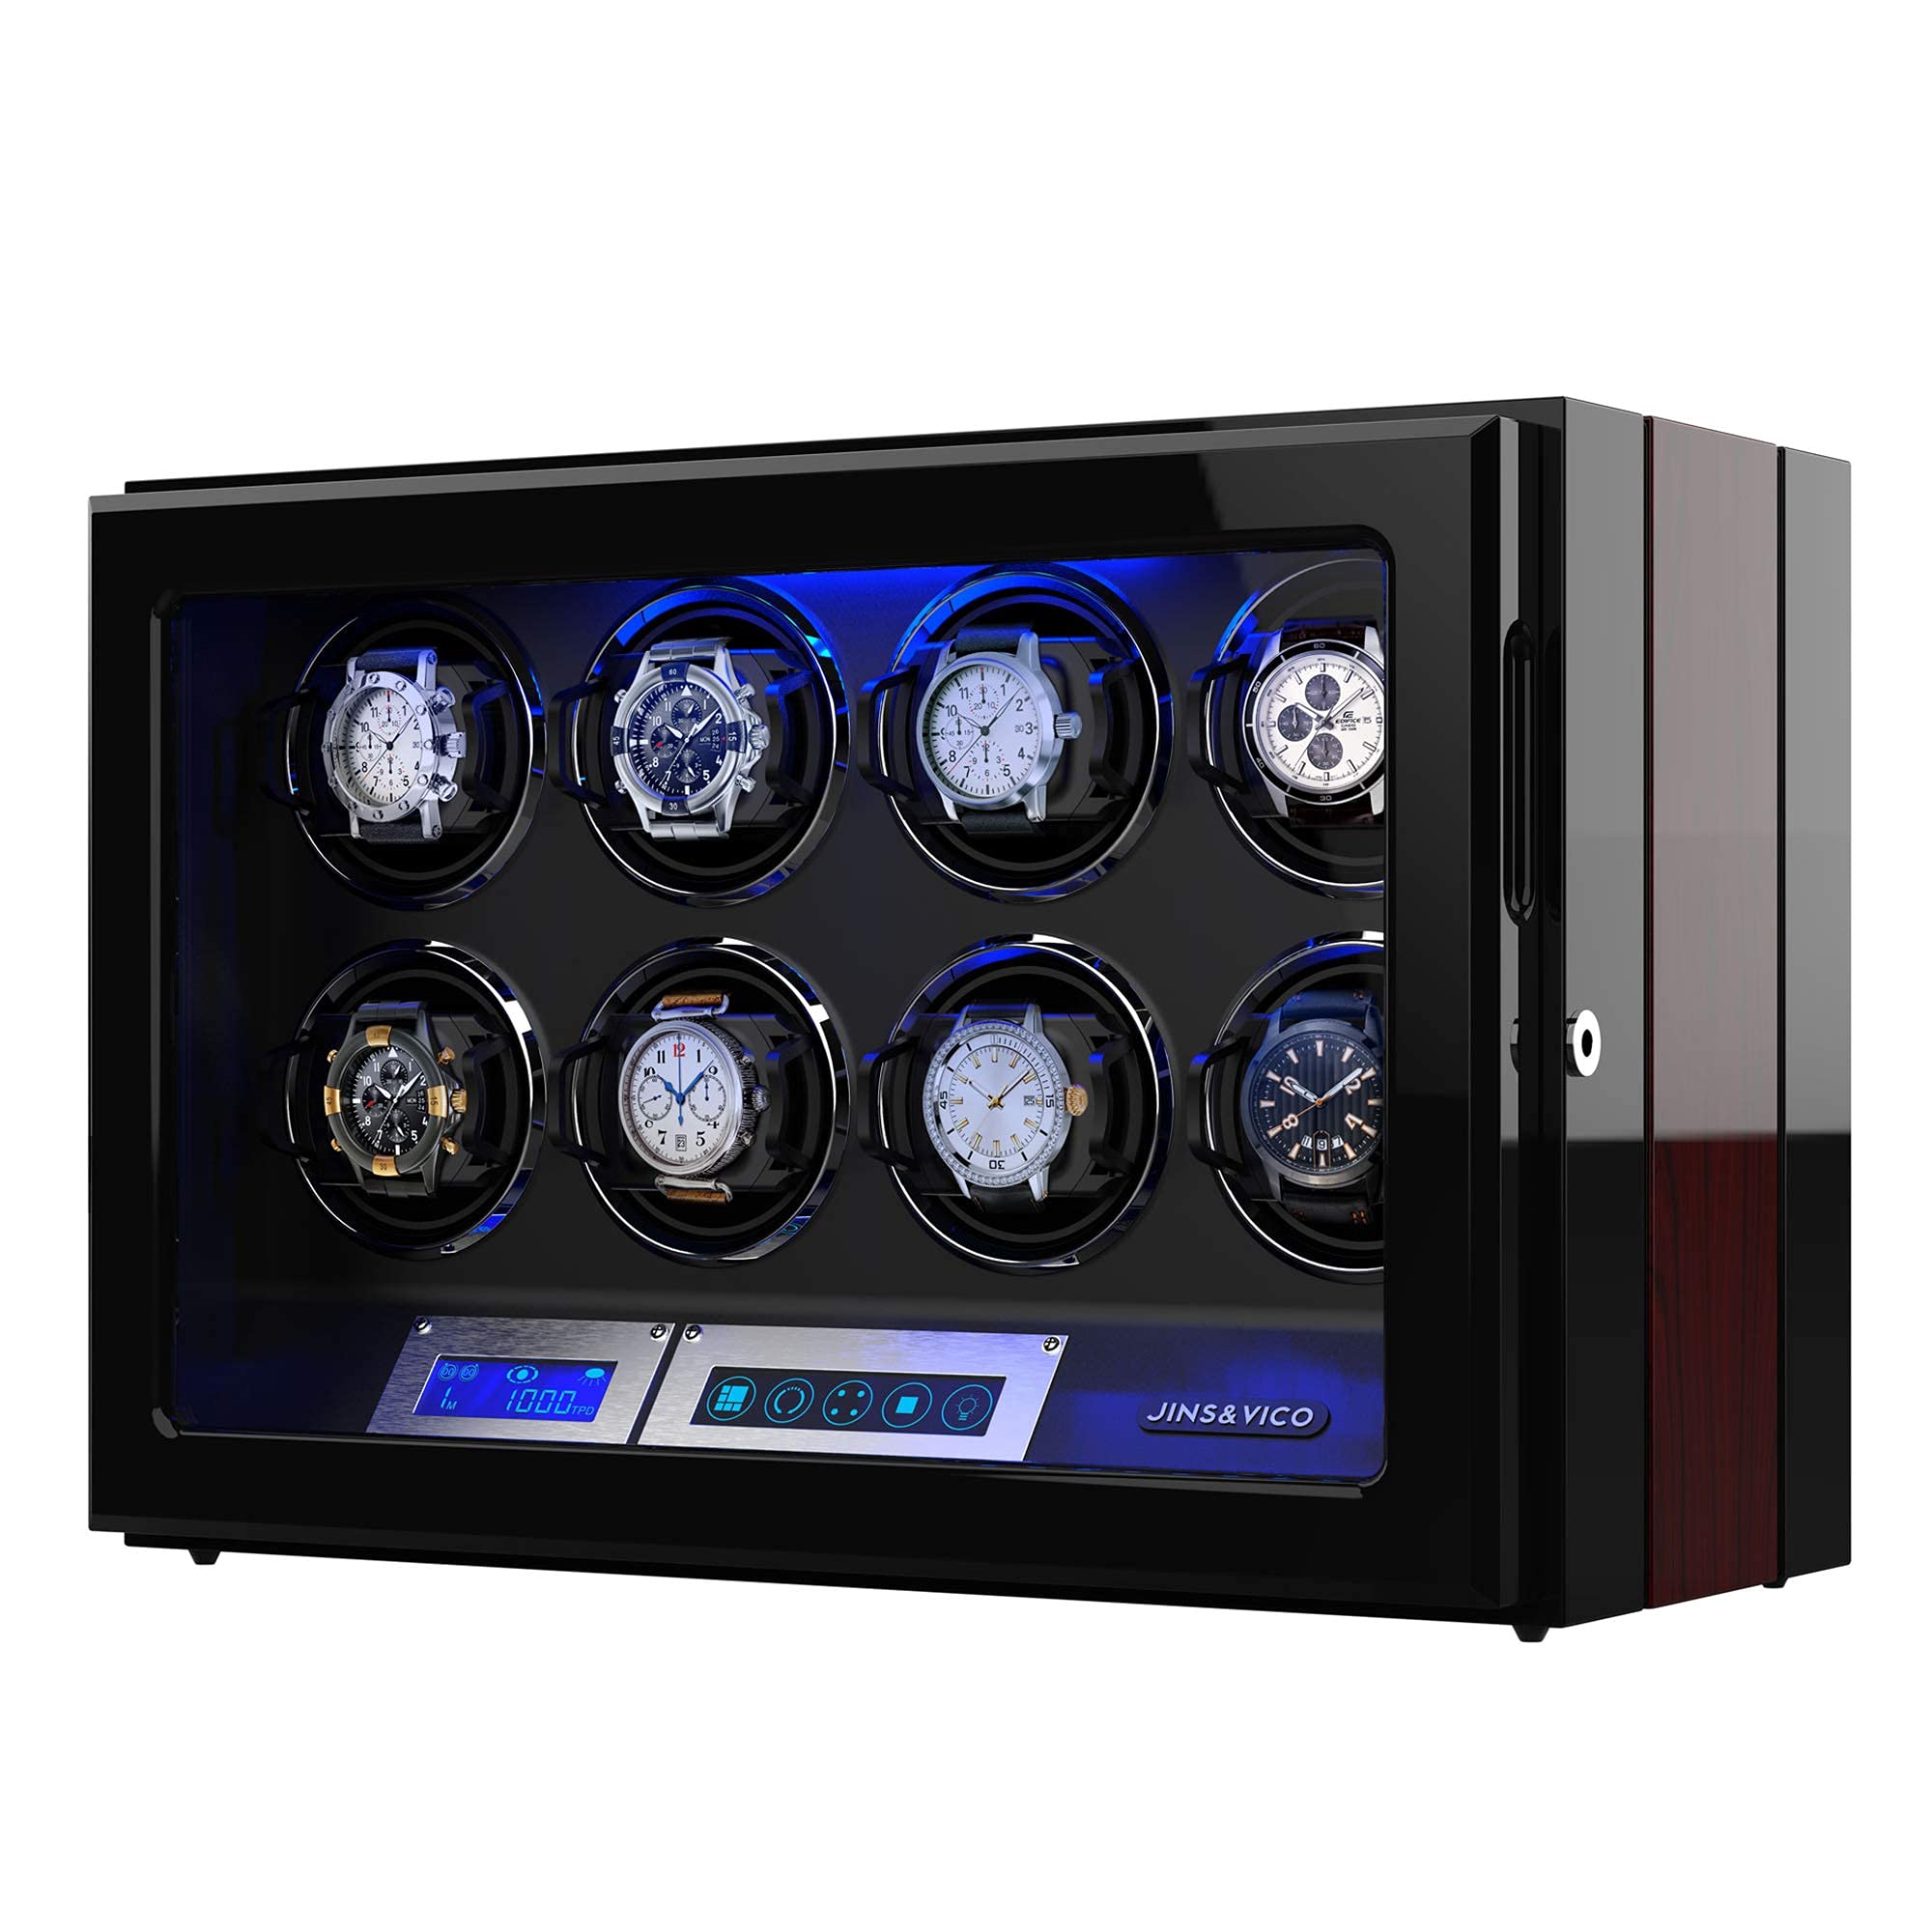 Watch Winder, Adjustable [Upgraded] Watch Pillows, 8 Winding Spaces Watch Winders for Automatic Watches, Built-in Illumination